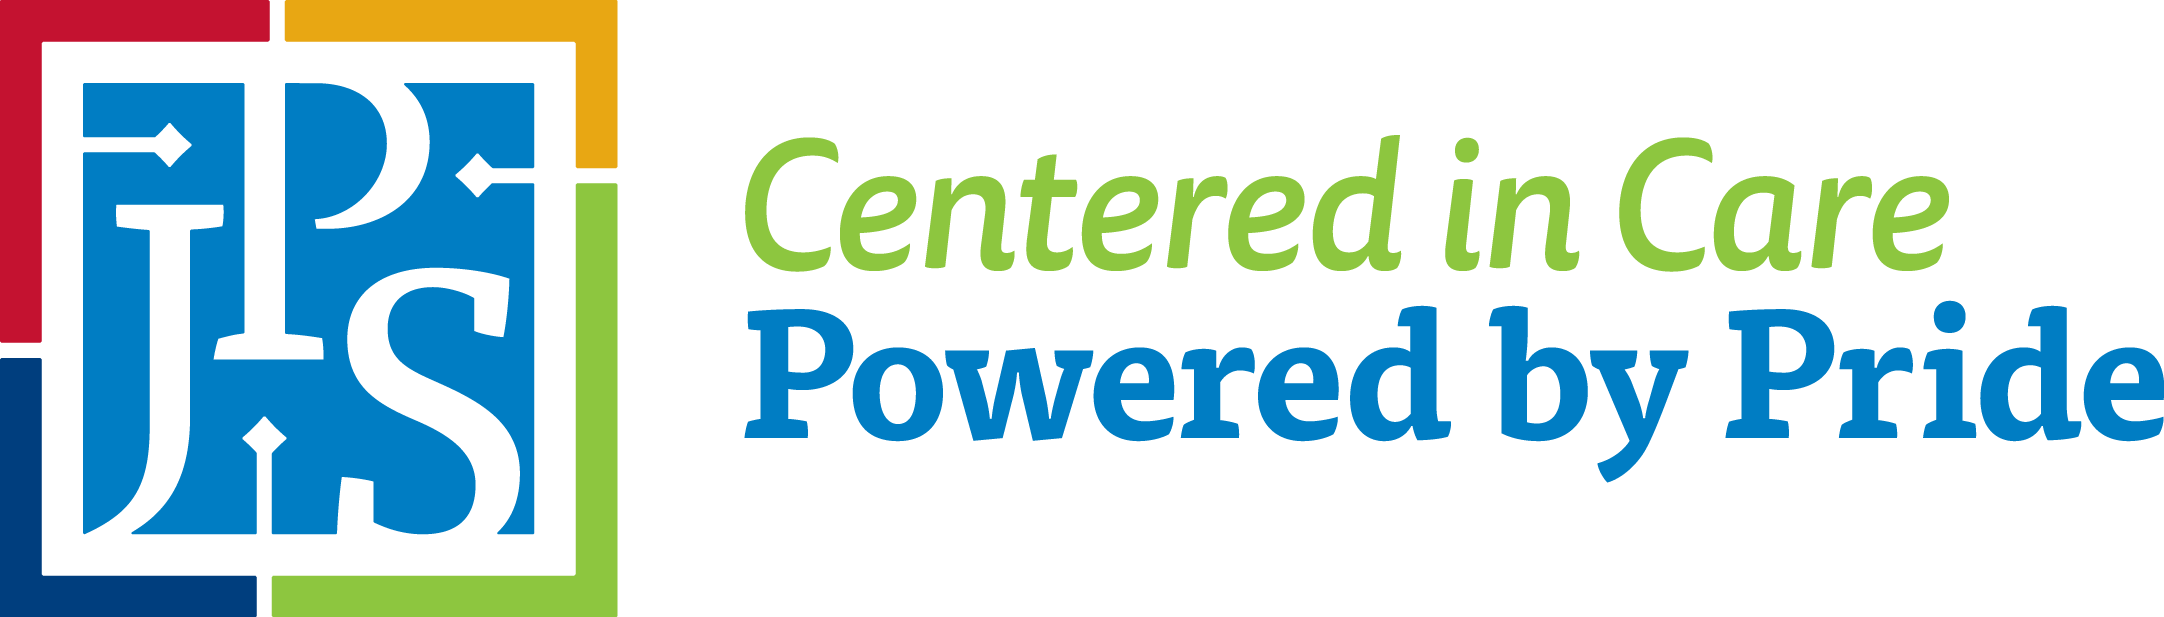 JPS Center in Care Powered by Pride Logo